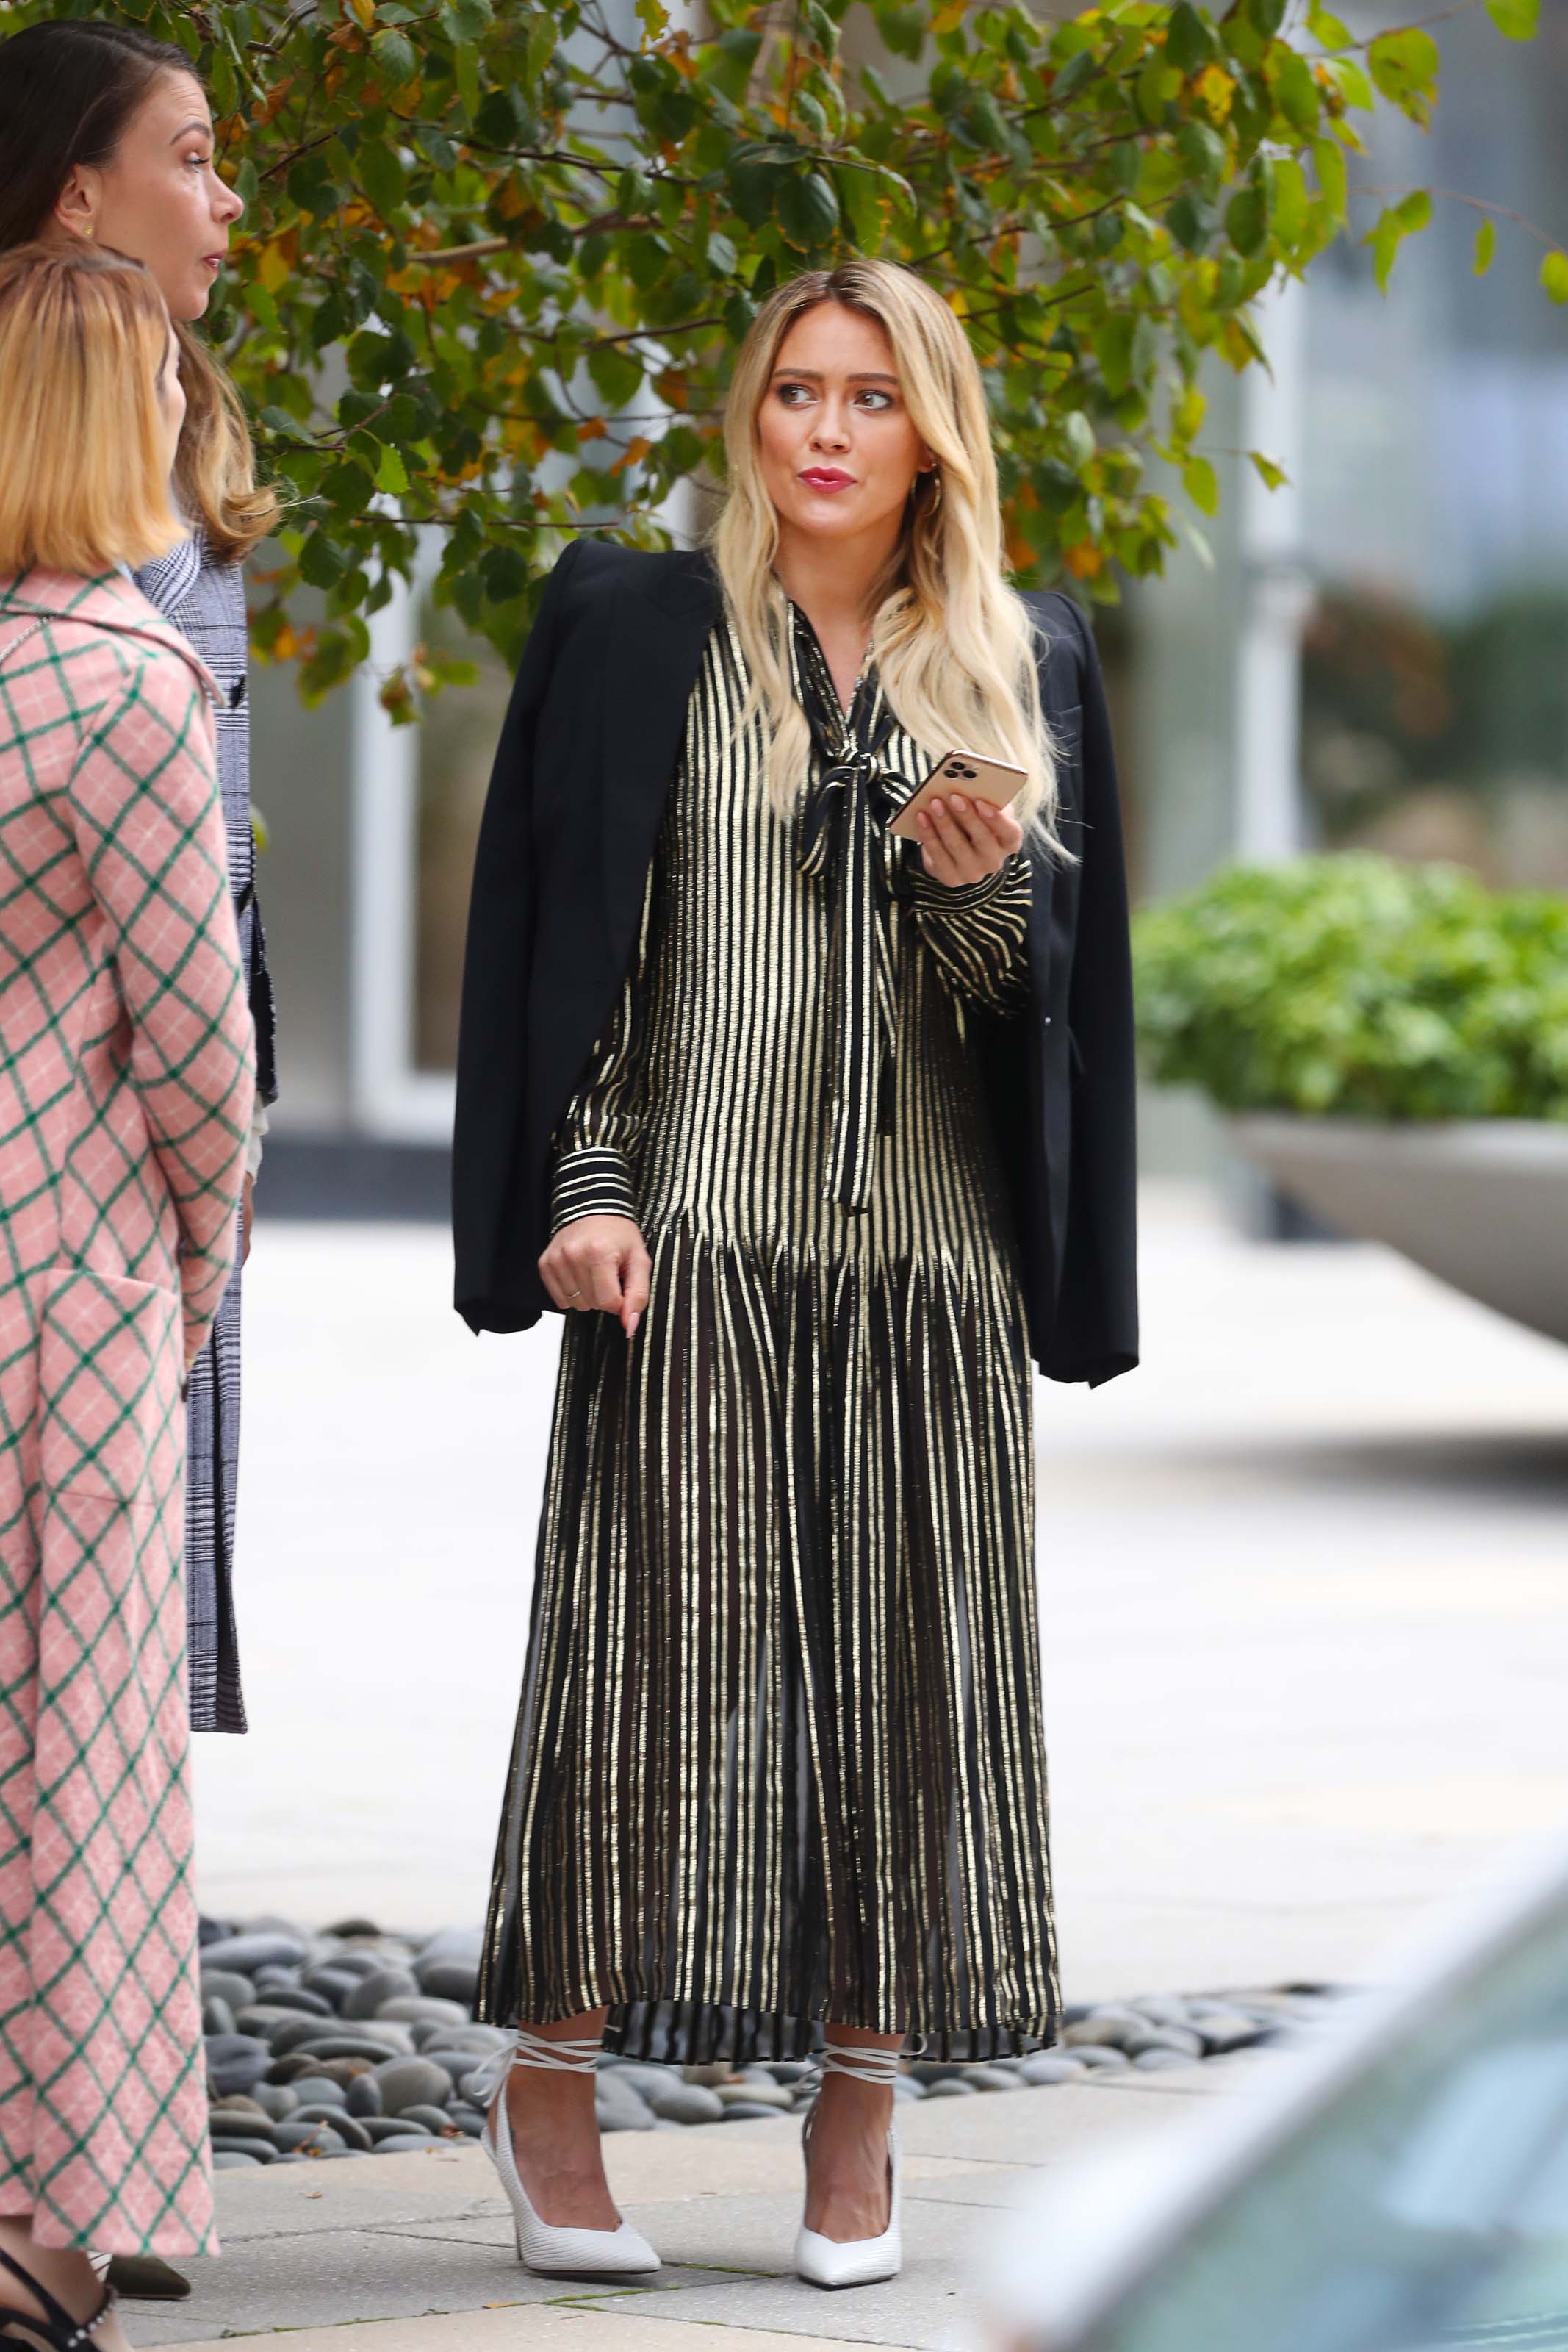 Hilary Duff seen on the set of Younger in New York City